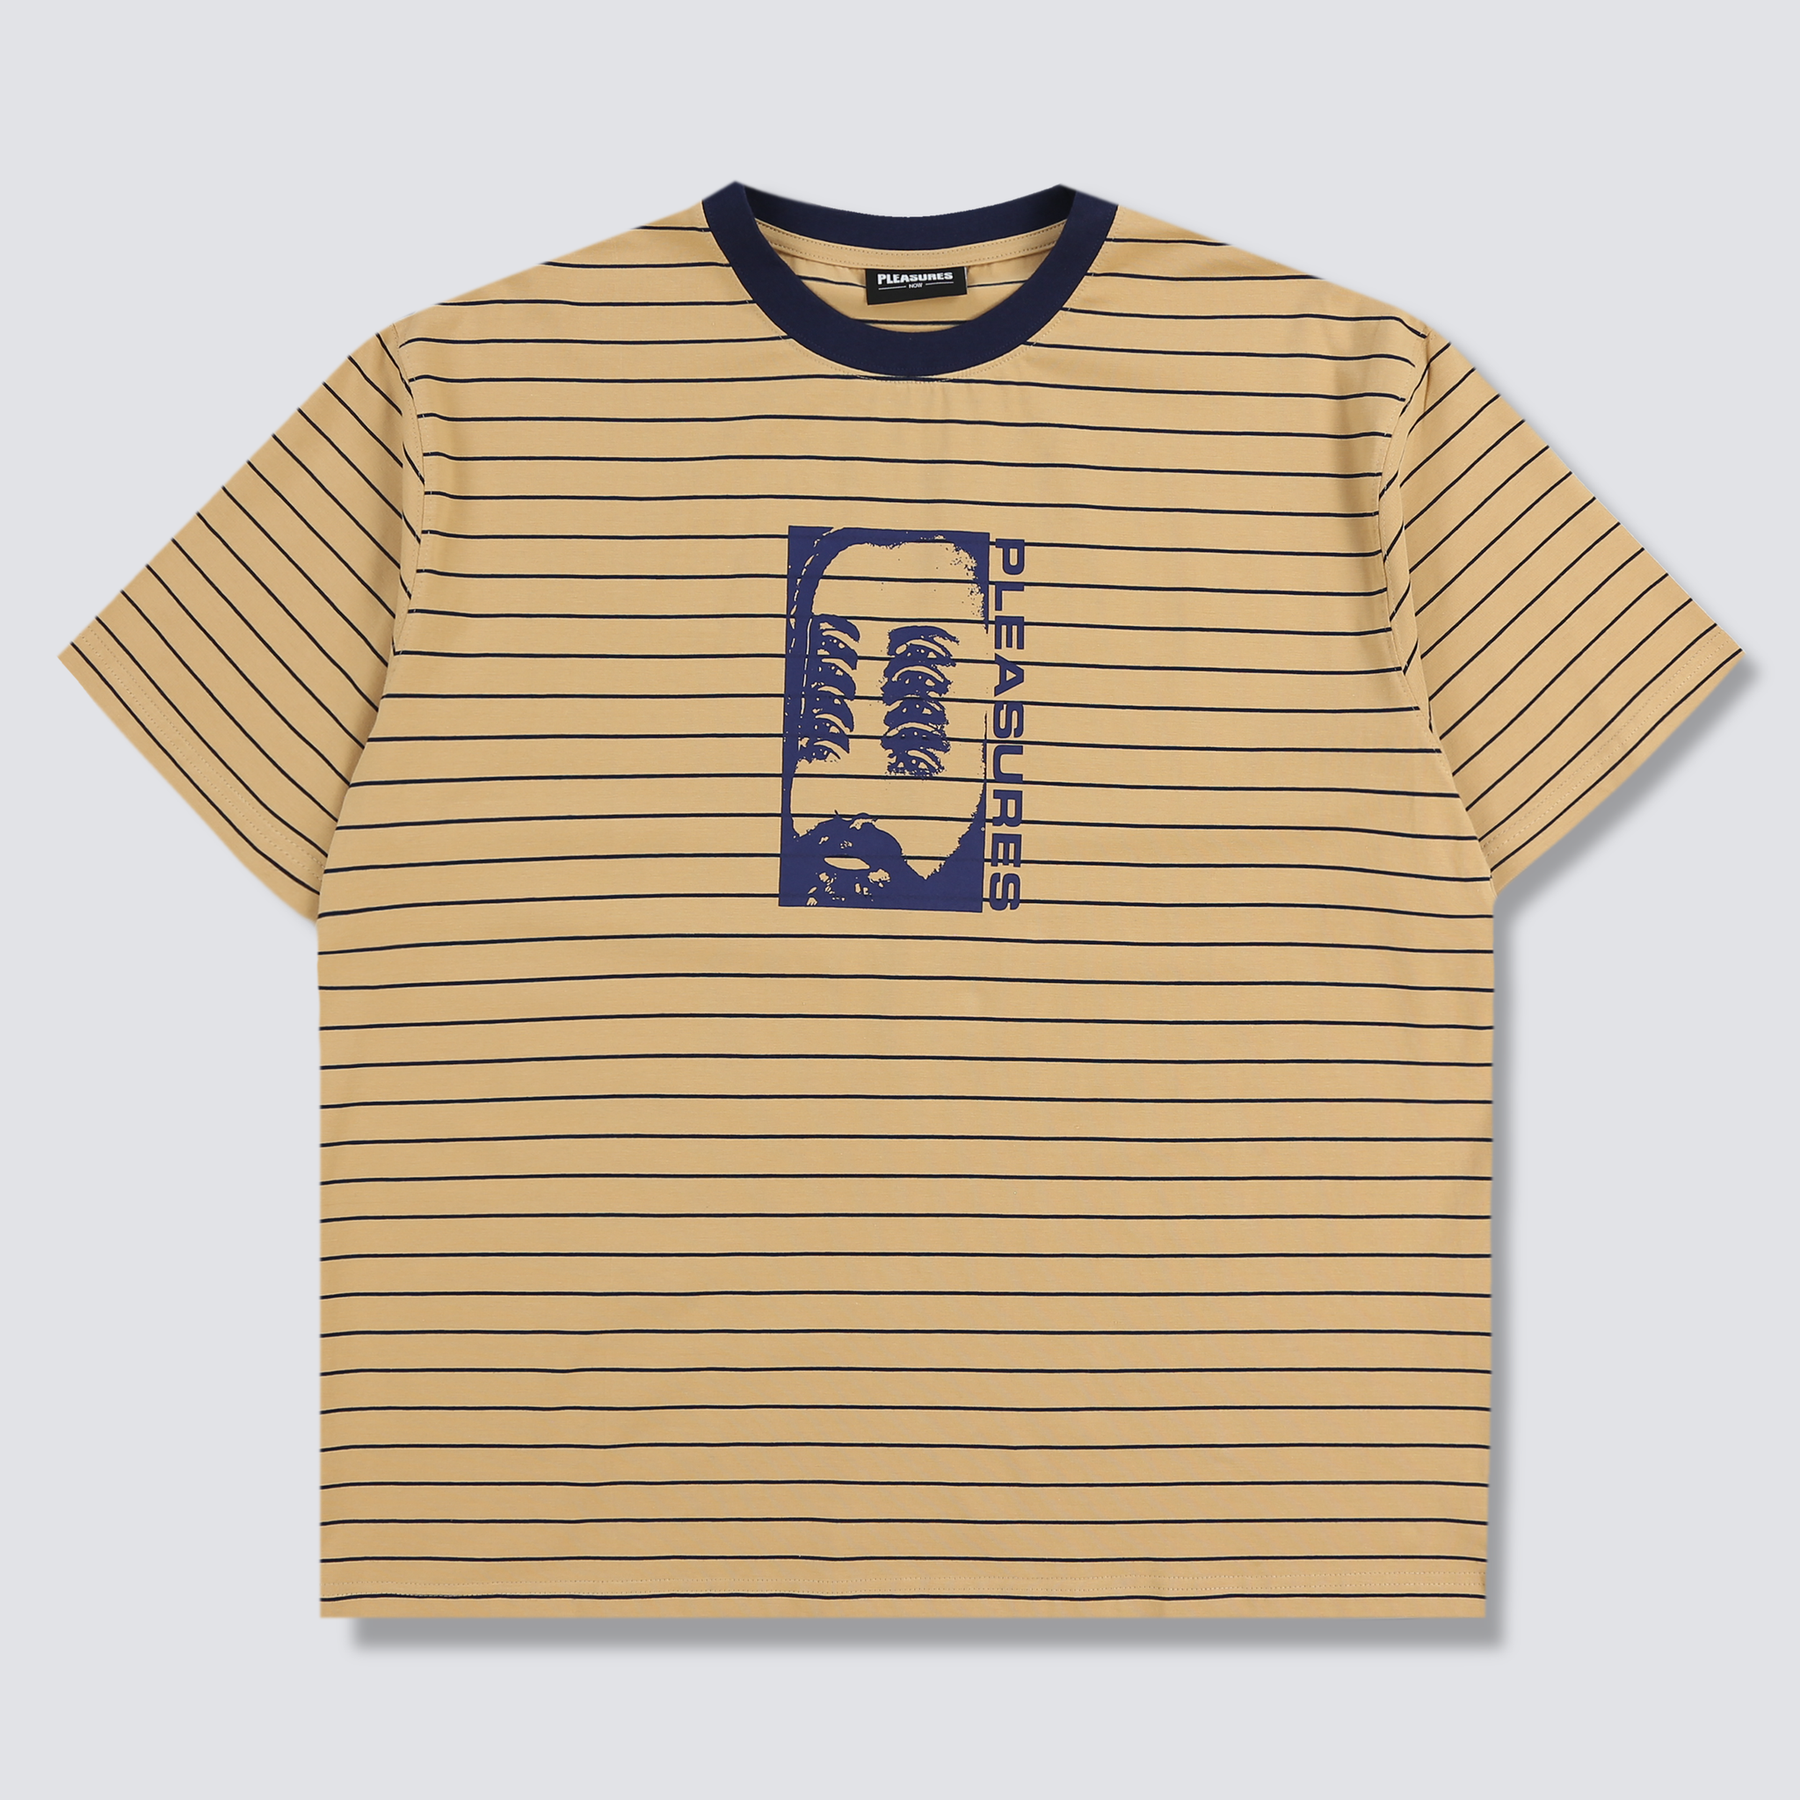 Foresight Striped Shirt in Tan